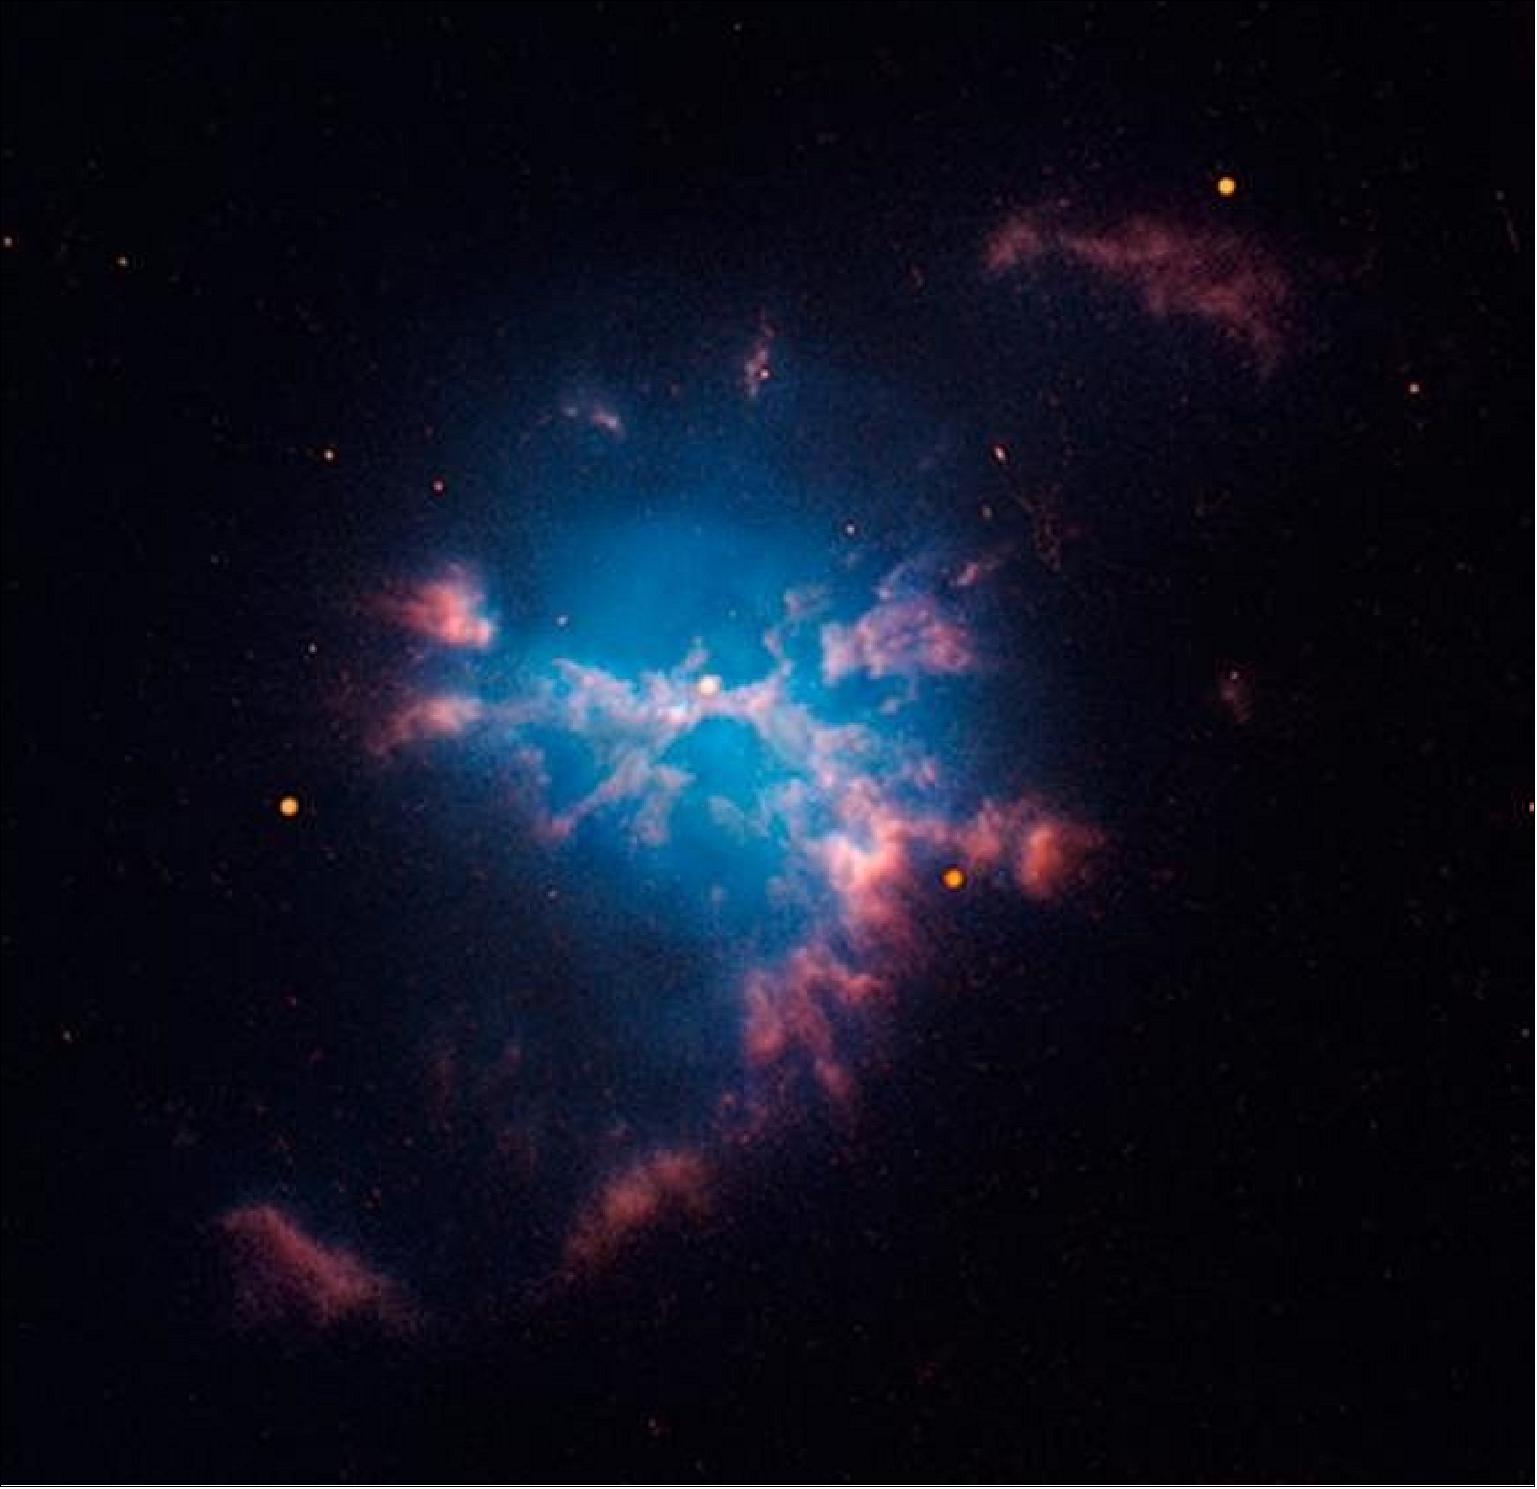 Figure 13: An image obtained with the Hubble Space Telescope of the planetary nebula M3-1, the central star of which is actually a binary system with one of the shortest orbital periods known (image credit: David Jones - IAC)